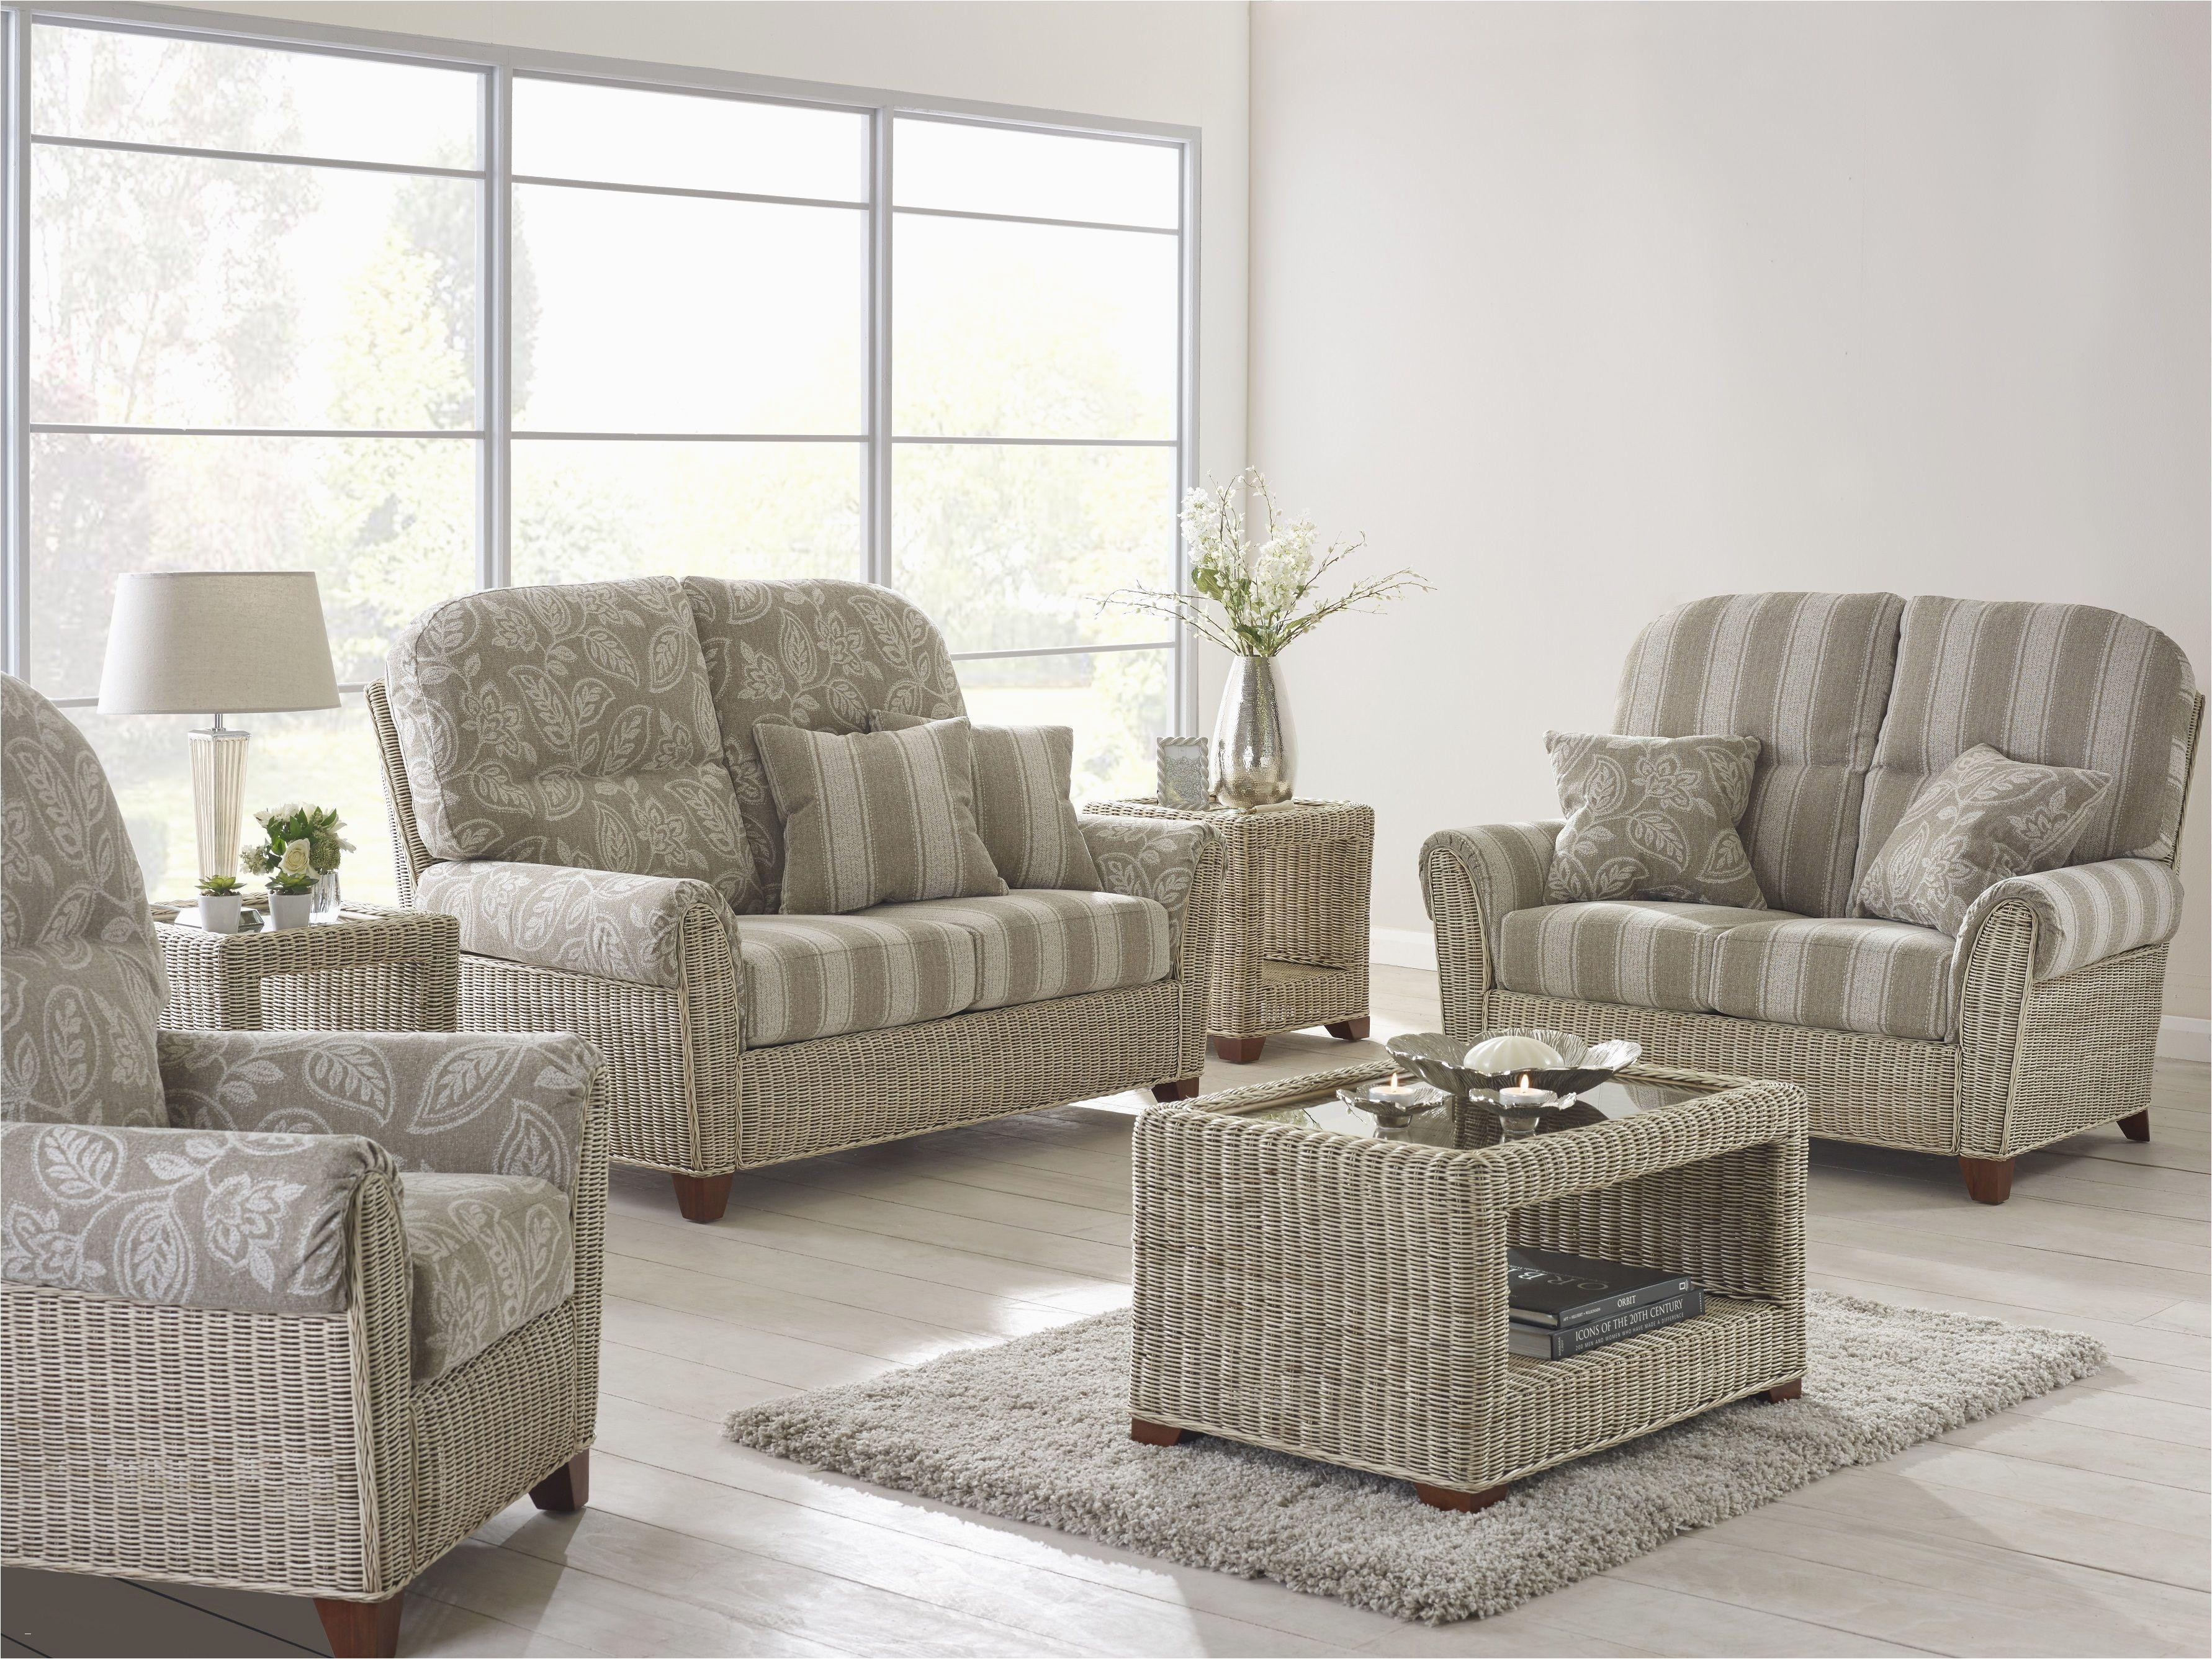 living room chairs for sale beautiful furniture loveseat outdoor new wicker outdoor sofa 0d patio chairs